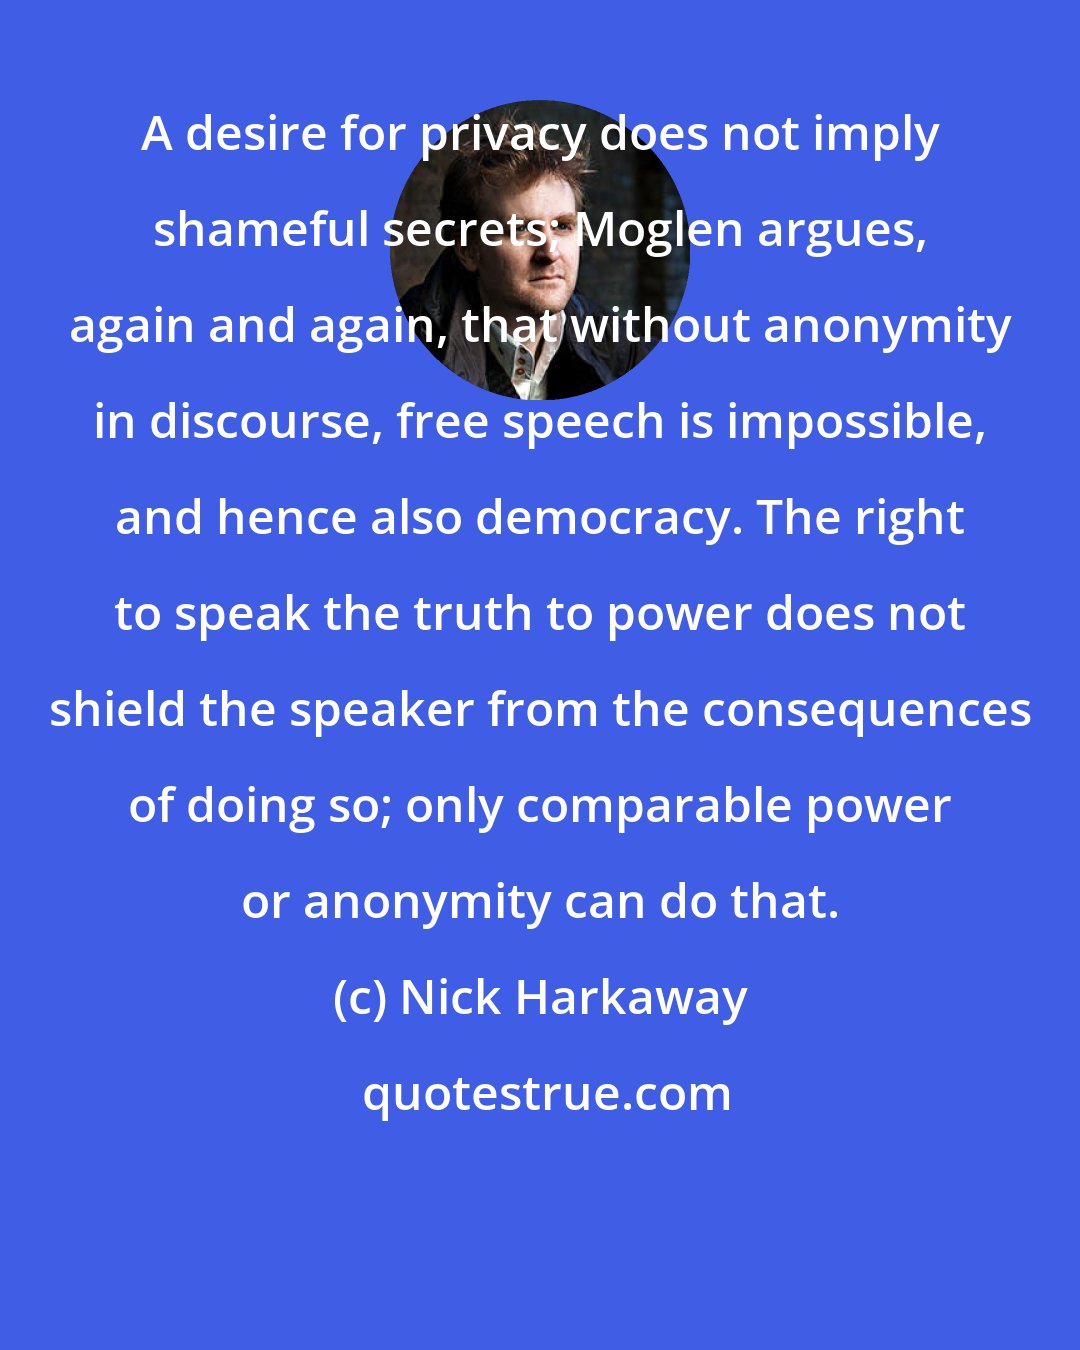 Nick Harkaway: A desire for privacy does not imply shameful secrets; Moglen argues, again and again, that without anonymity in discourse, free speech is impossible, and hence also democracy. The right to speak the truth to power does not shield the speaker from the consequences of doing so; only comparable power or anonymity can do that.